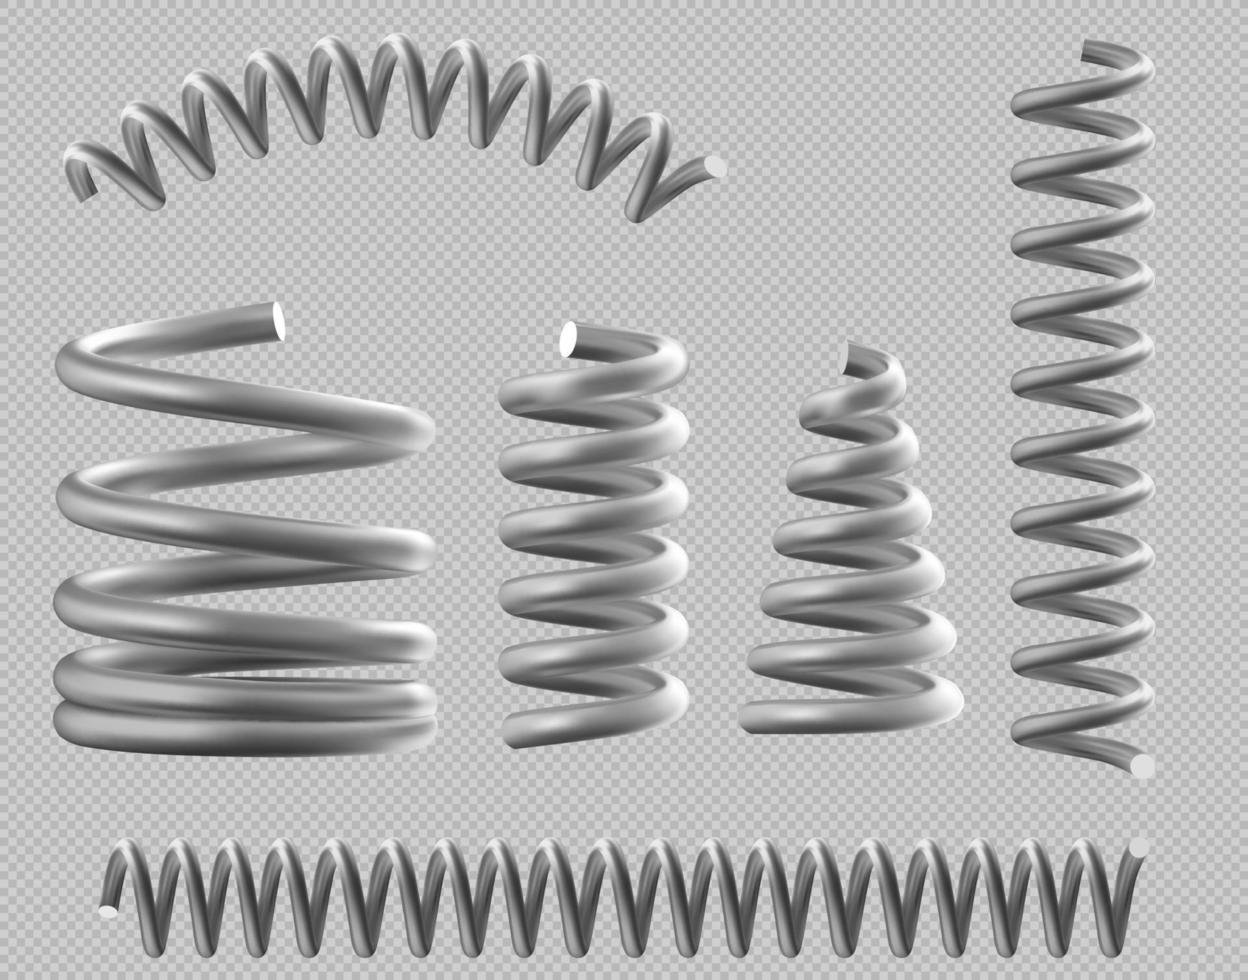 Metal springs, realistic coils for bed or car set vector